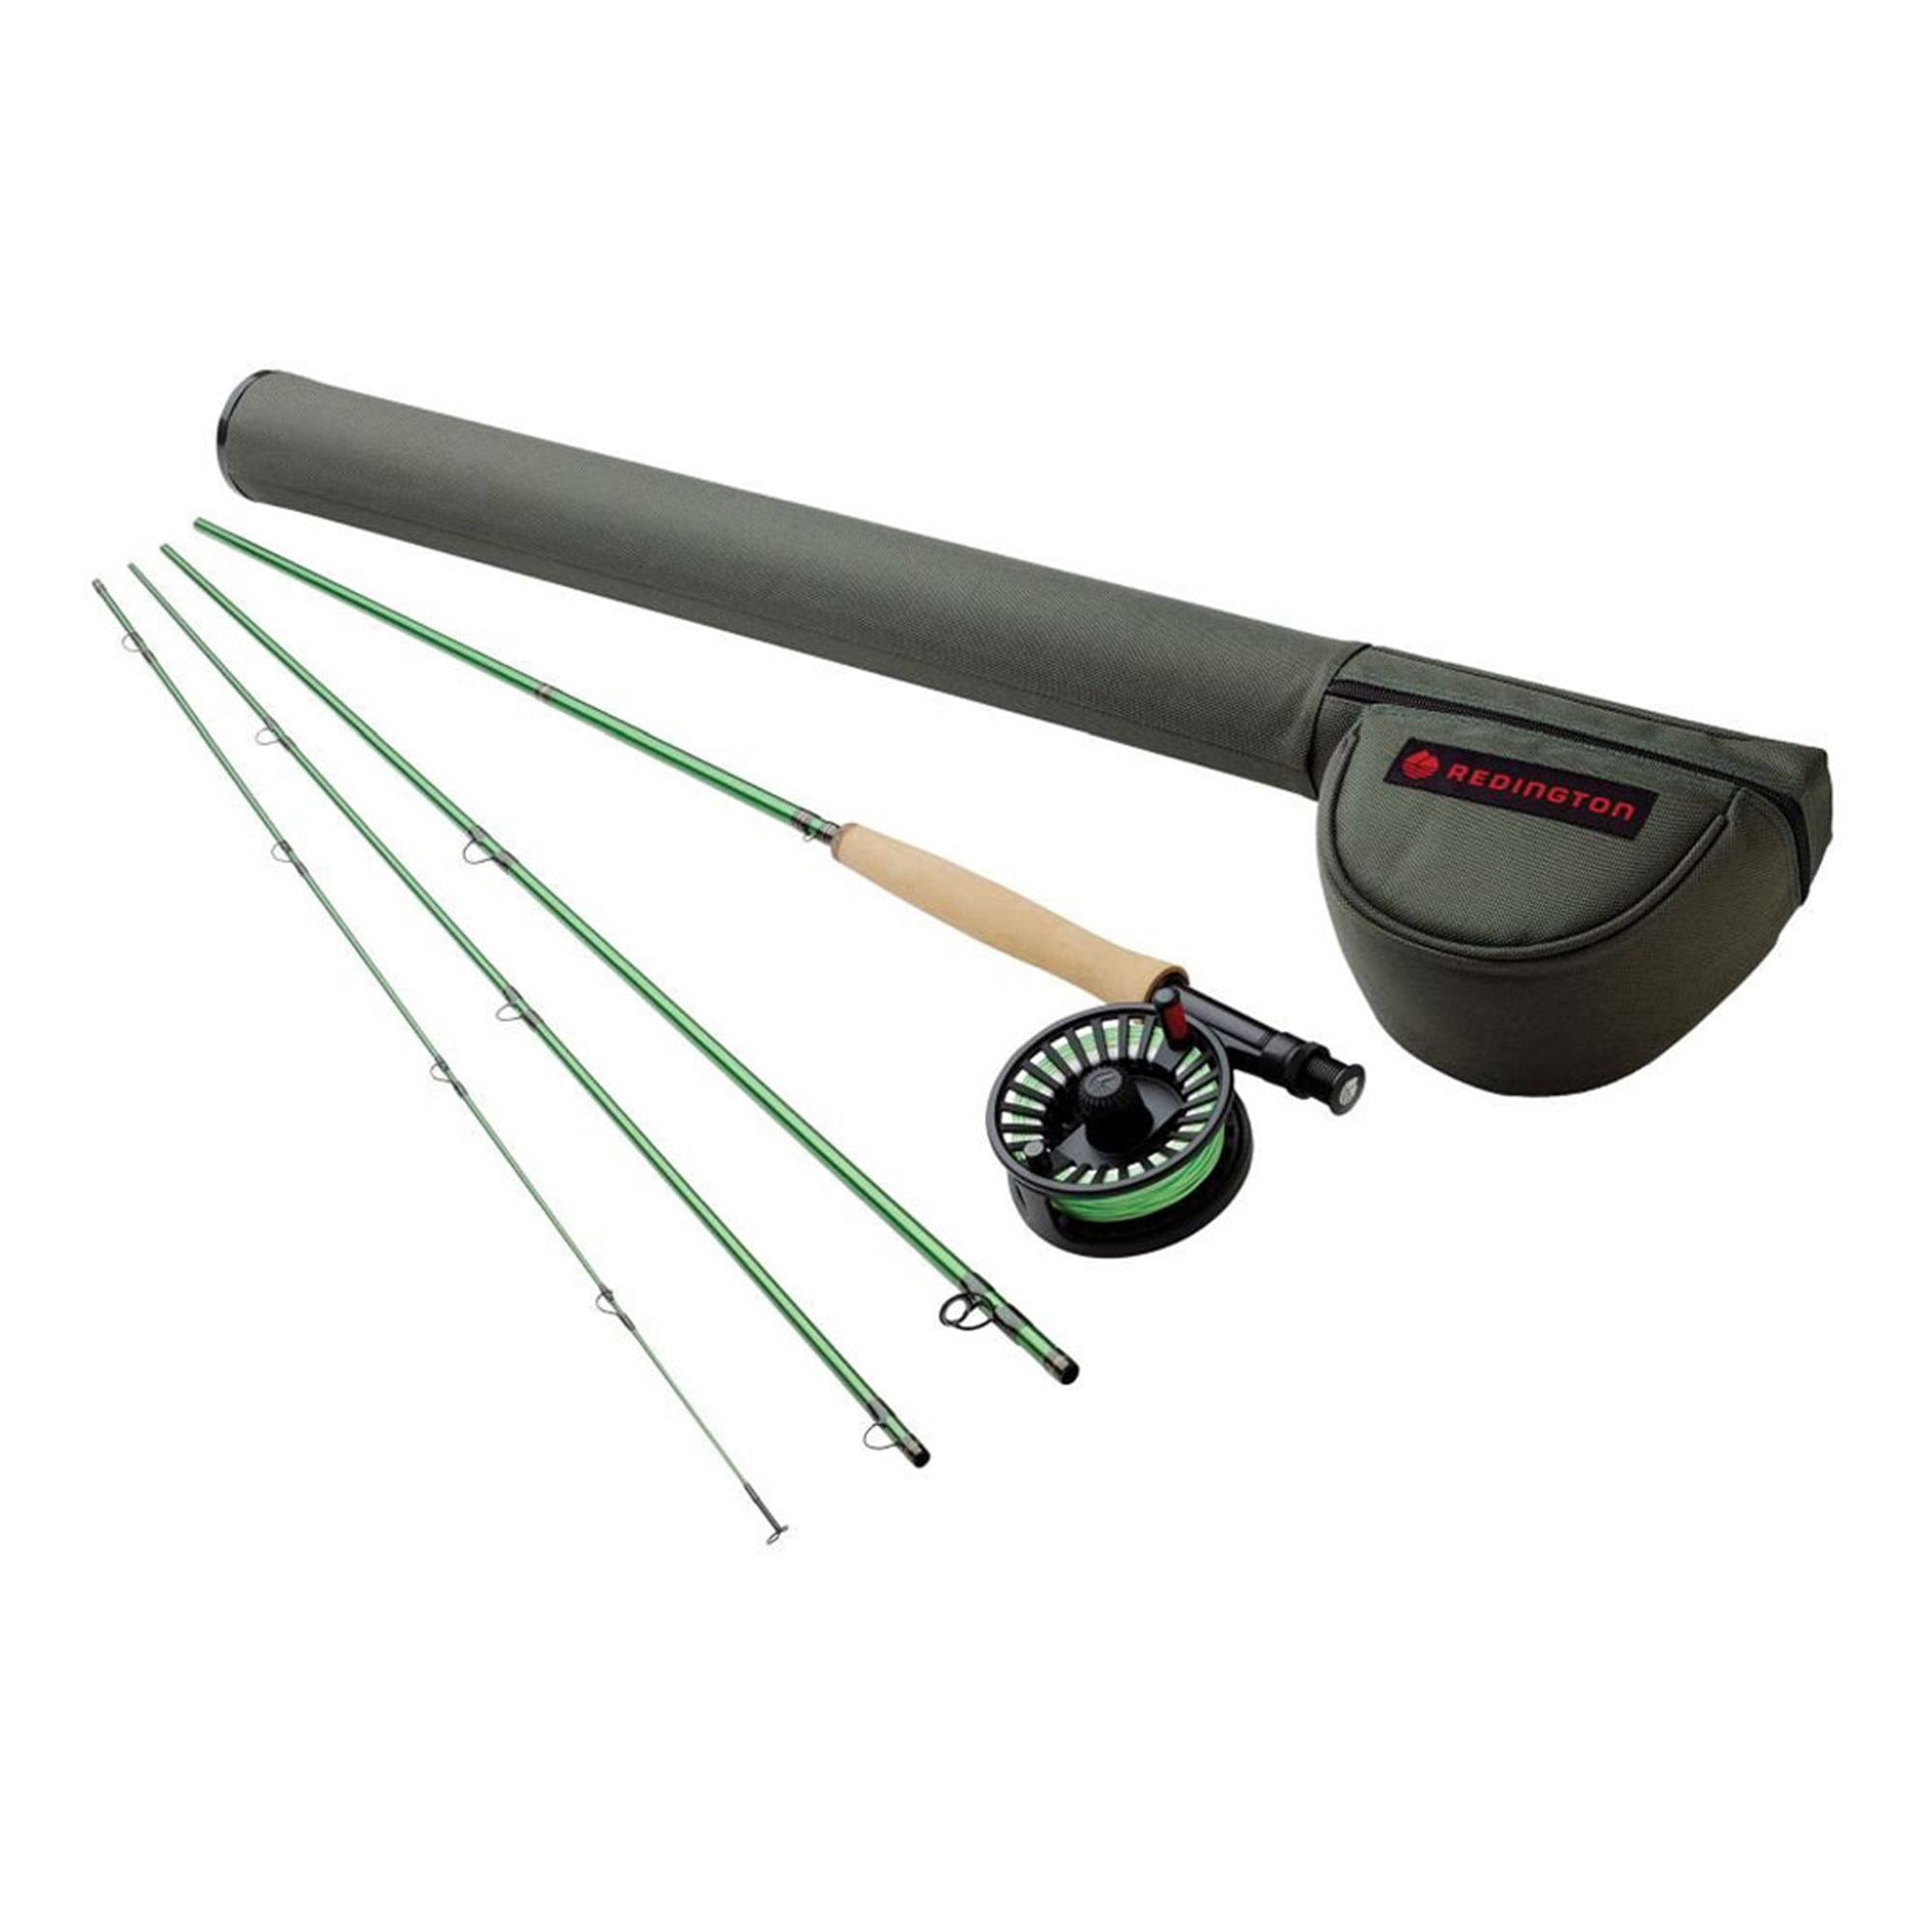 Fishing Fly Rod and Reel Combo With Carrying Case 3 Piece 8 Feet Long Black New 